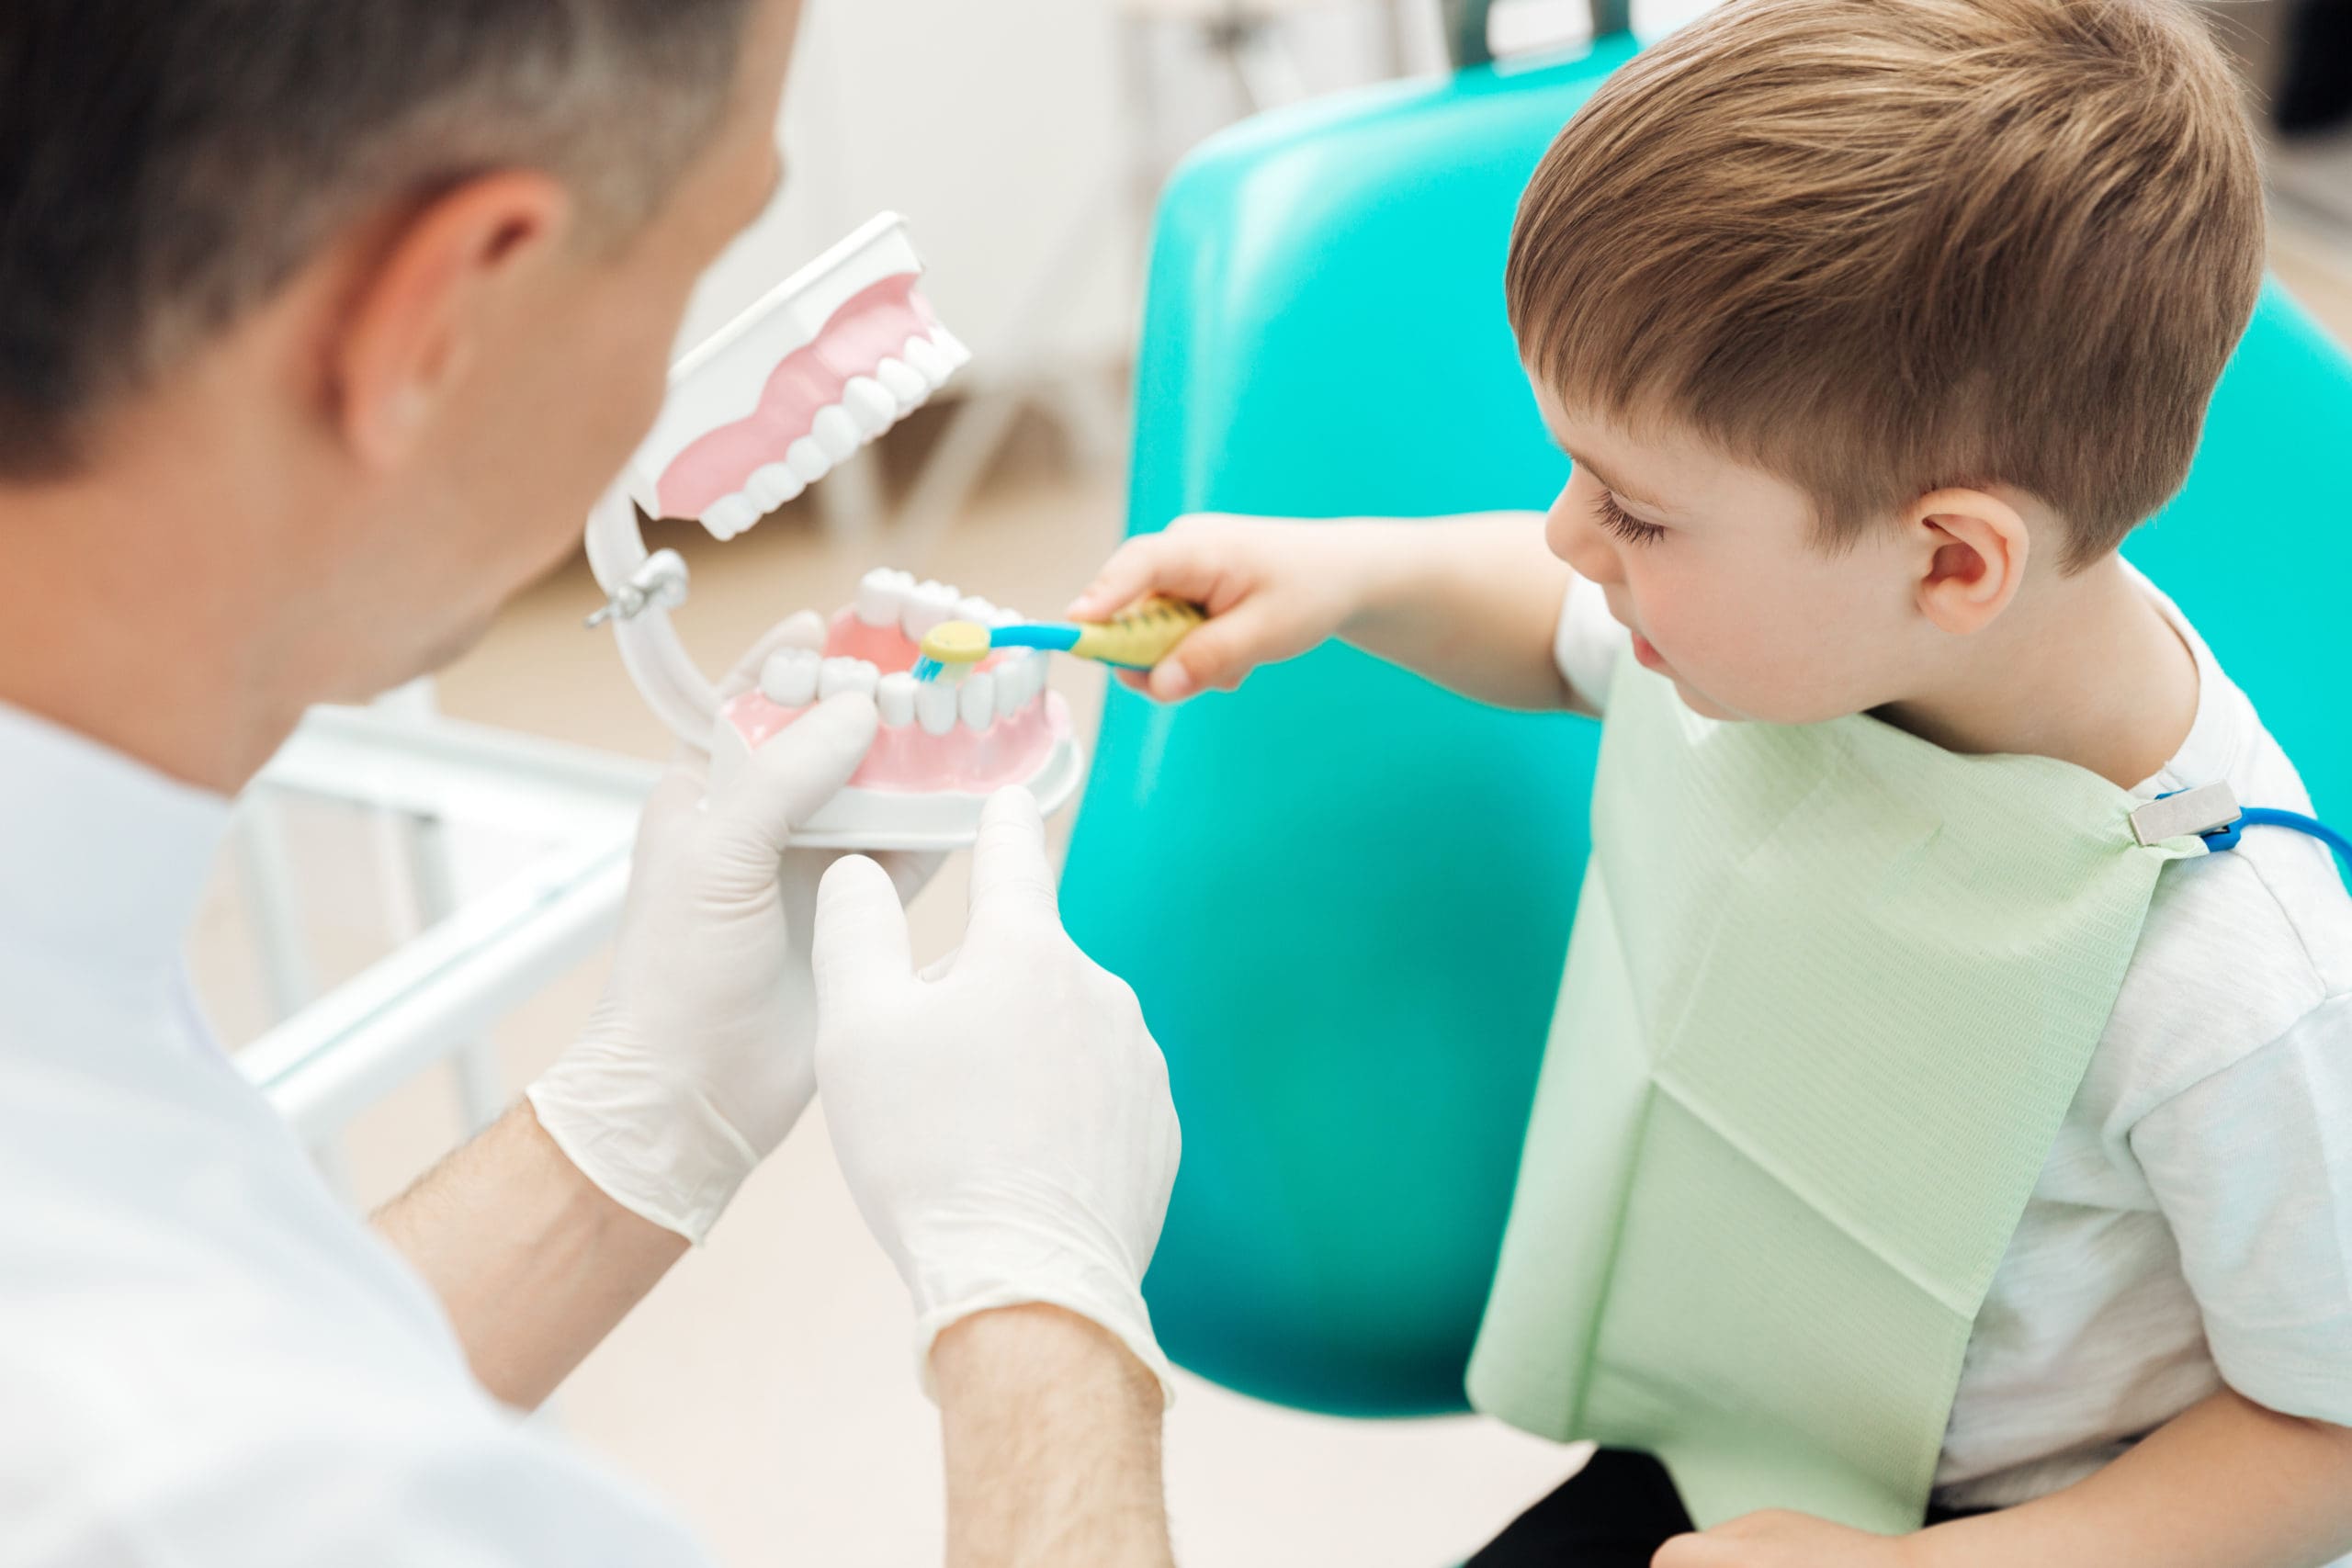 Trust our family dentist with your child’s smile